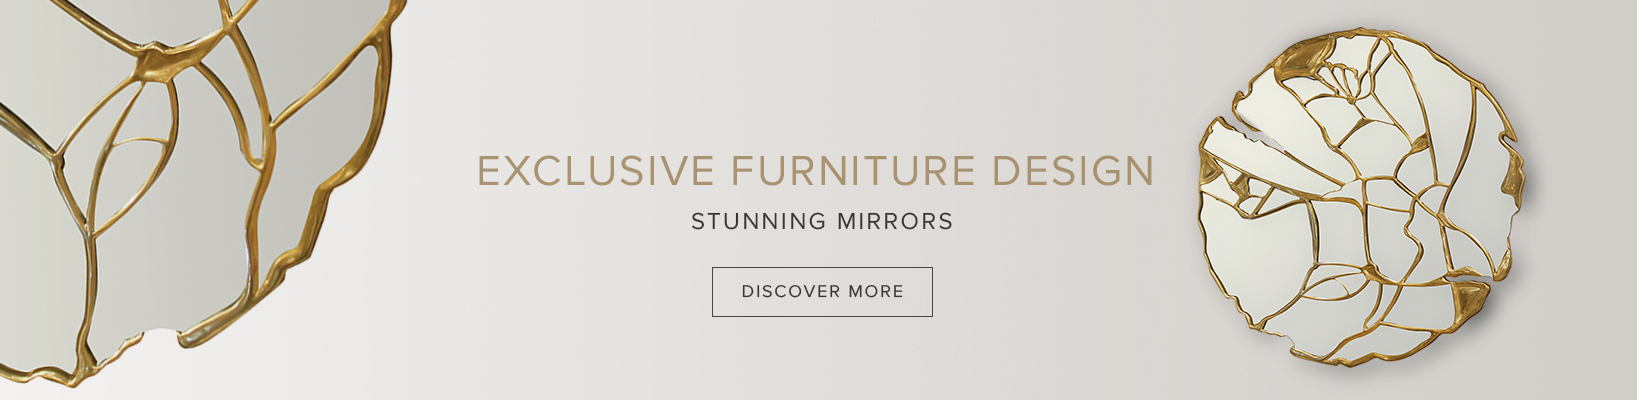 Exclusive Mirrors For Your Home Decor instagrammable hotel The Most Instagrammable Hotels in New York City banners 20glance